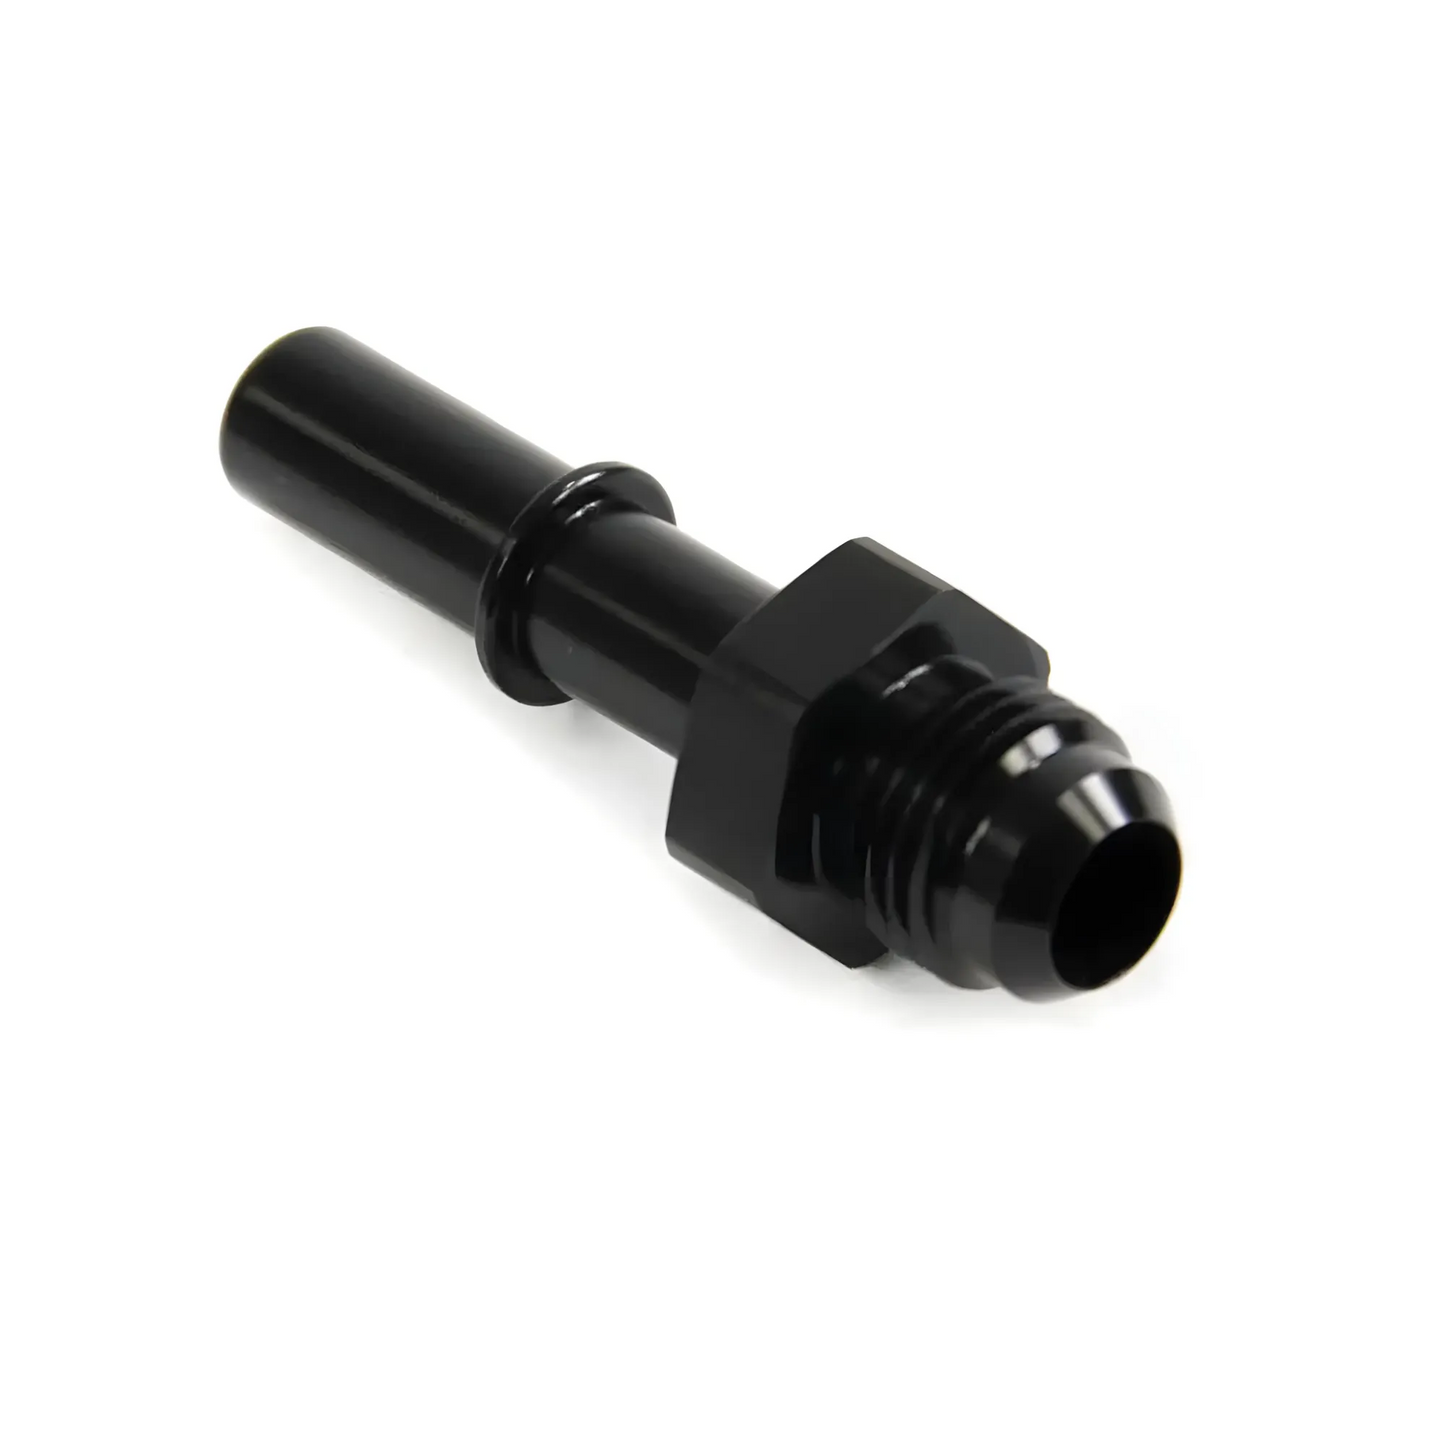 Nitrous Outlet 6AN x 3/8" Spring Lock Fuel Adapter - Male/Male